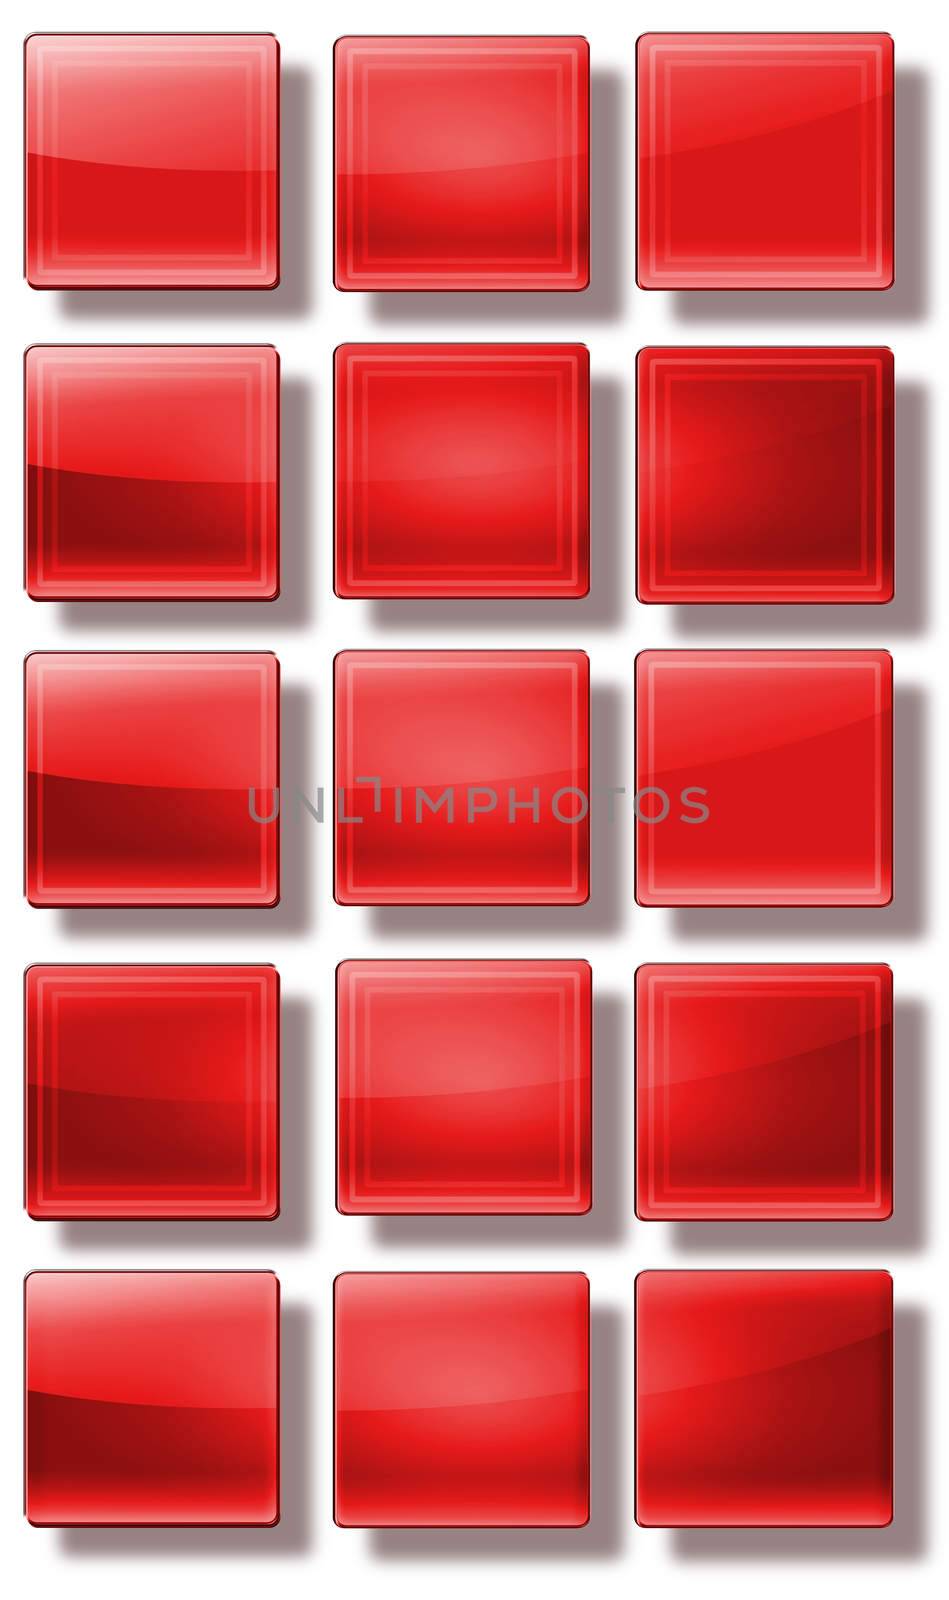 Set of web buttons made ������of glass, shiny, colorful, square, rectangle, circle,